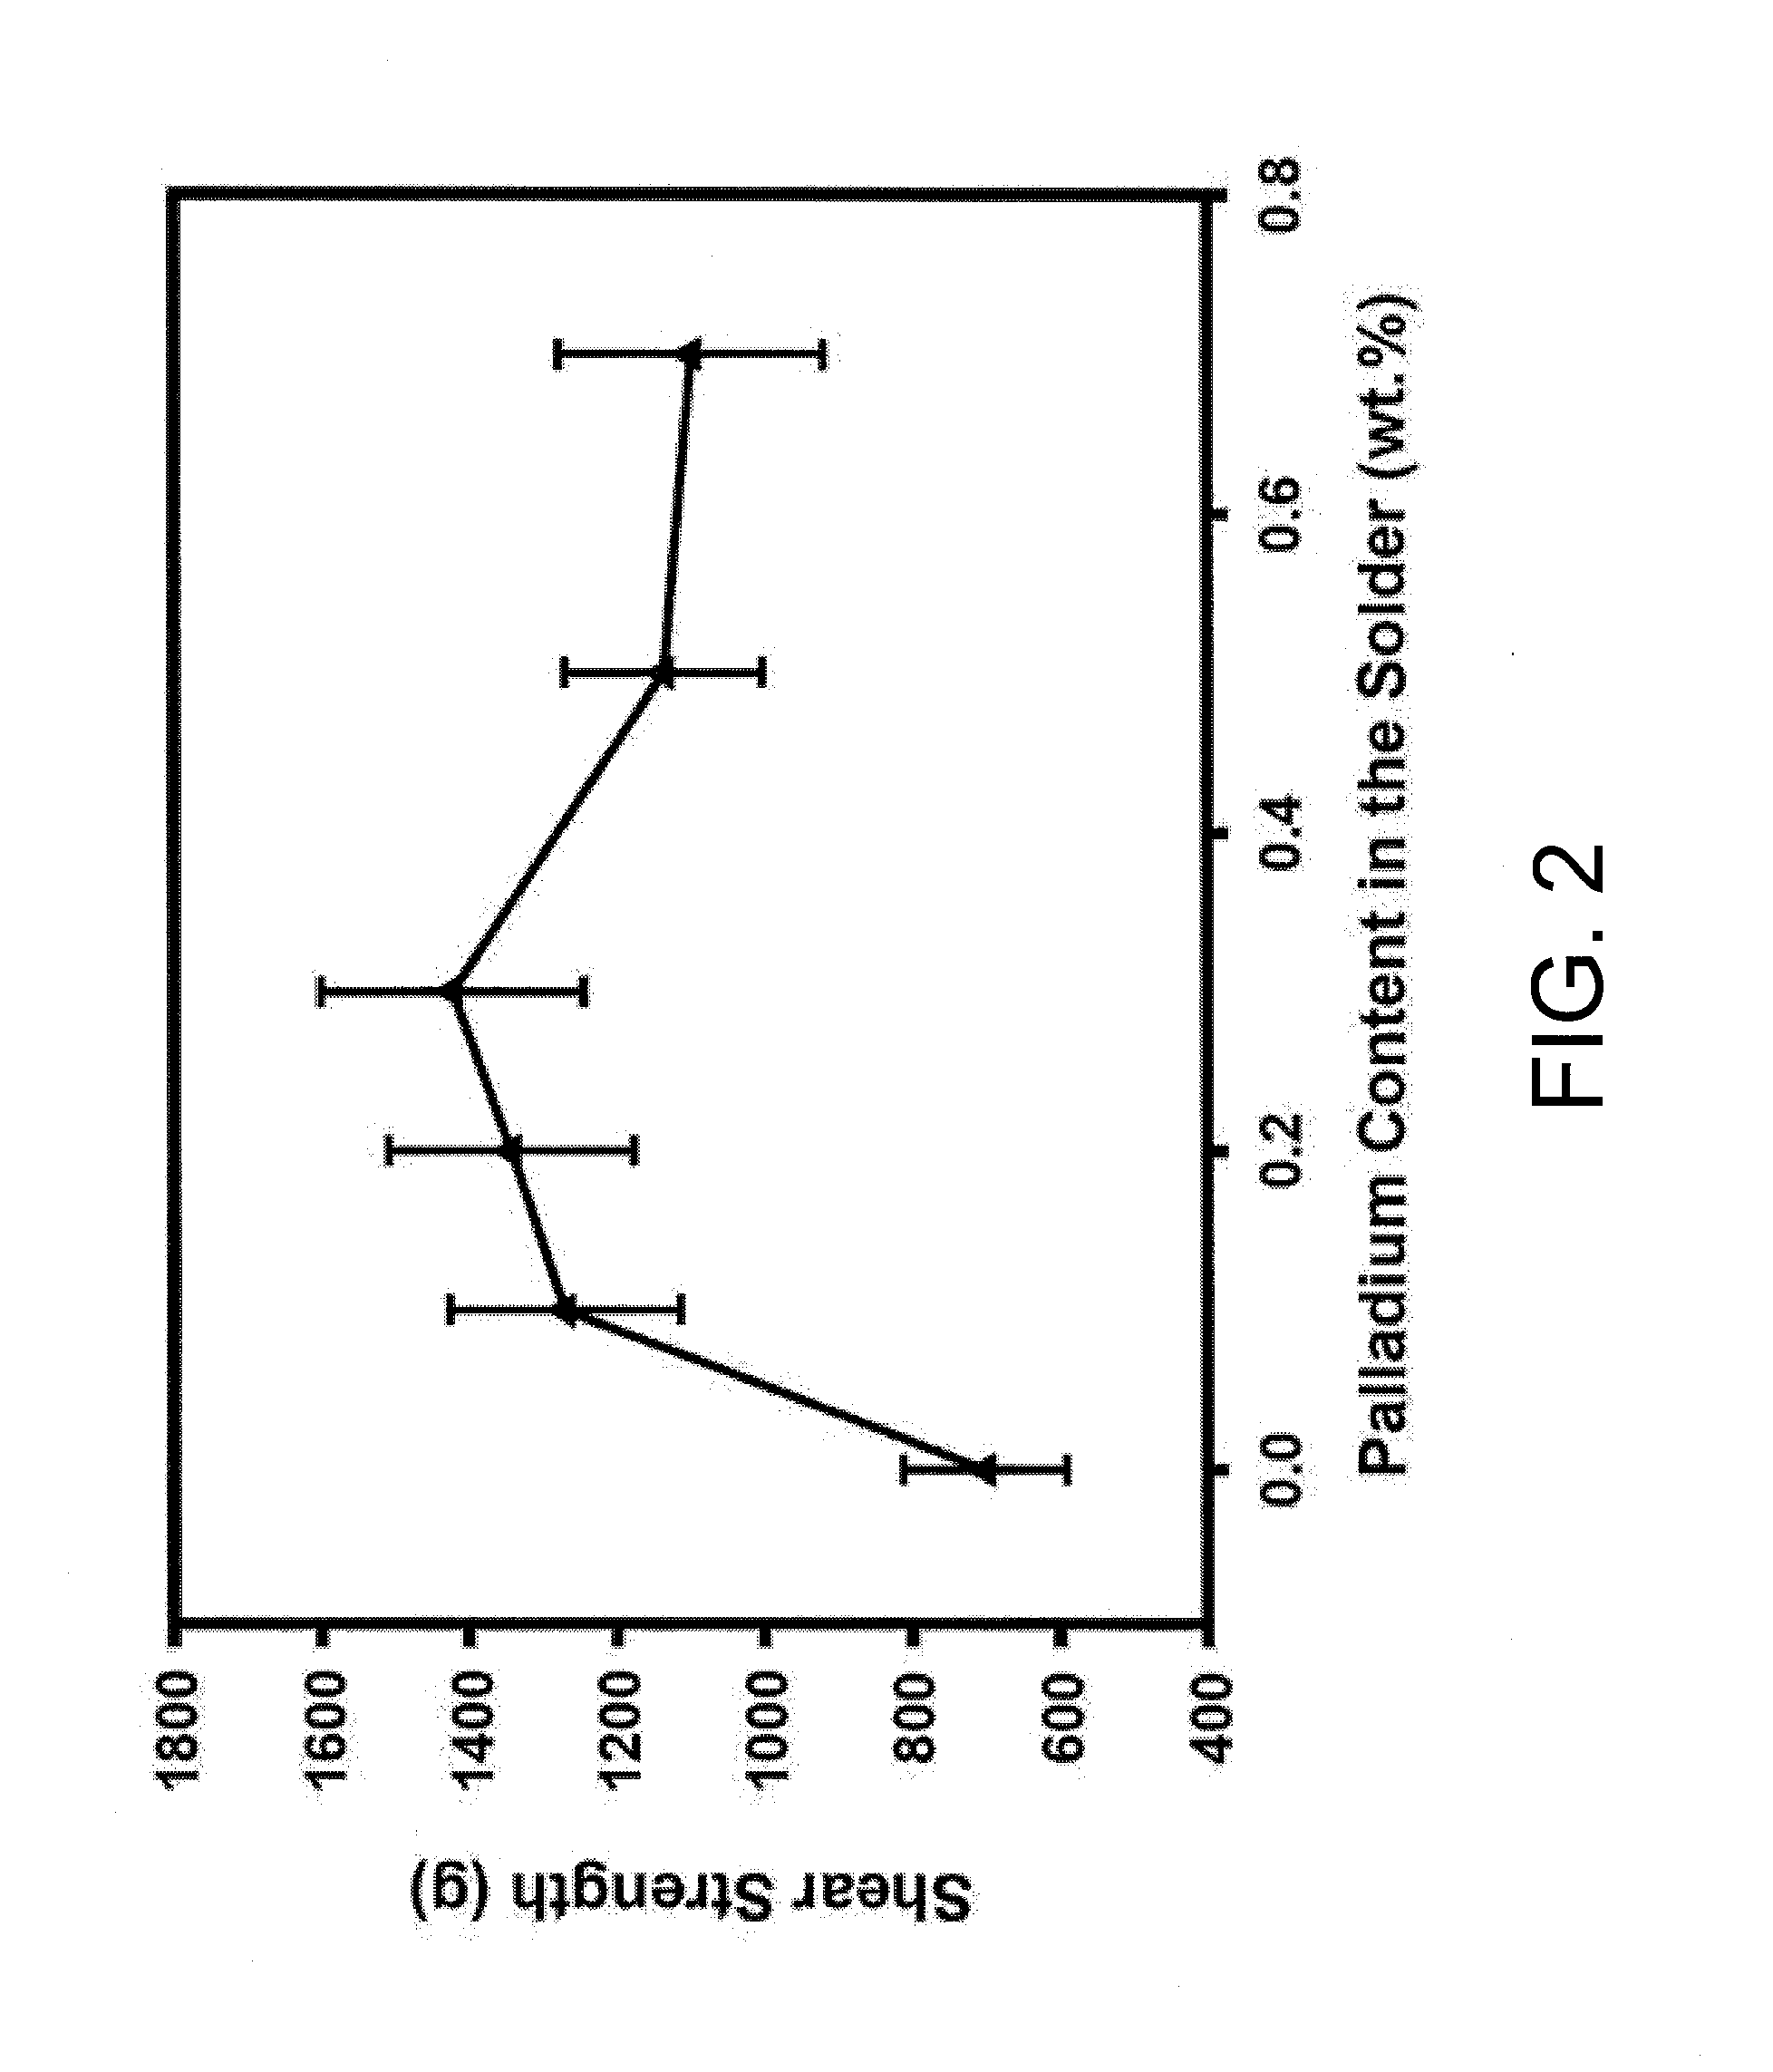 Method for suppressing kirkendall voids formation at the interface between solder and copper pad